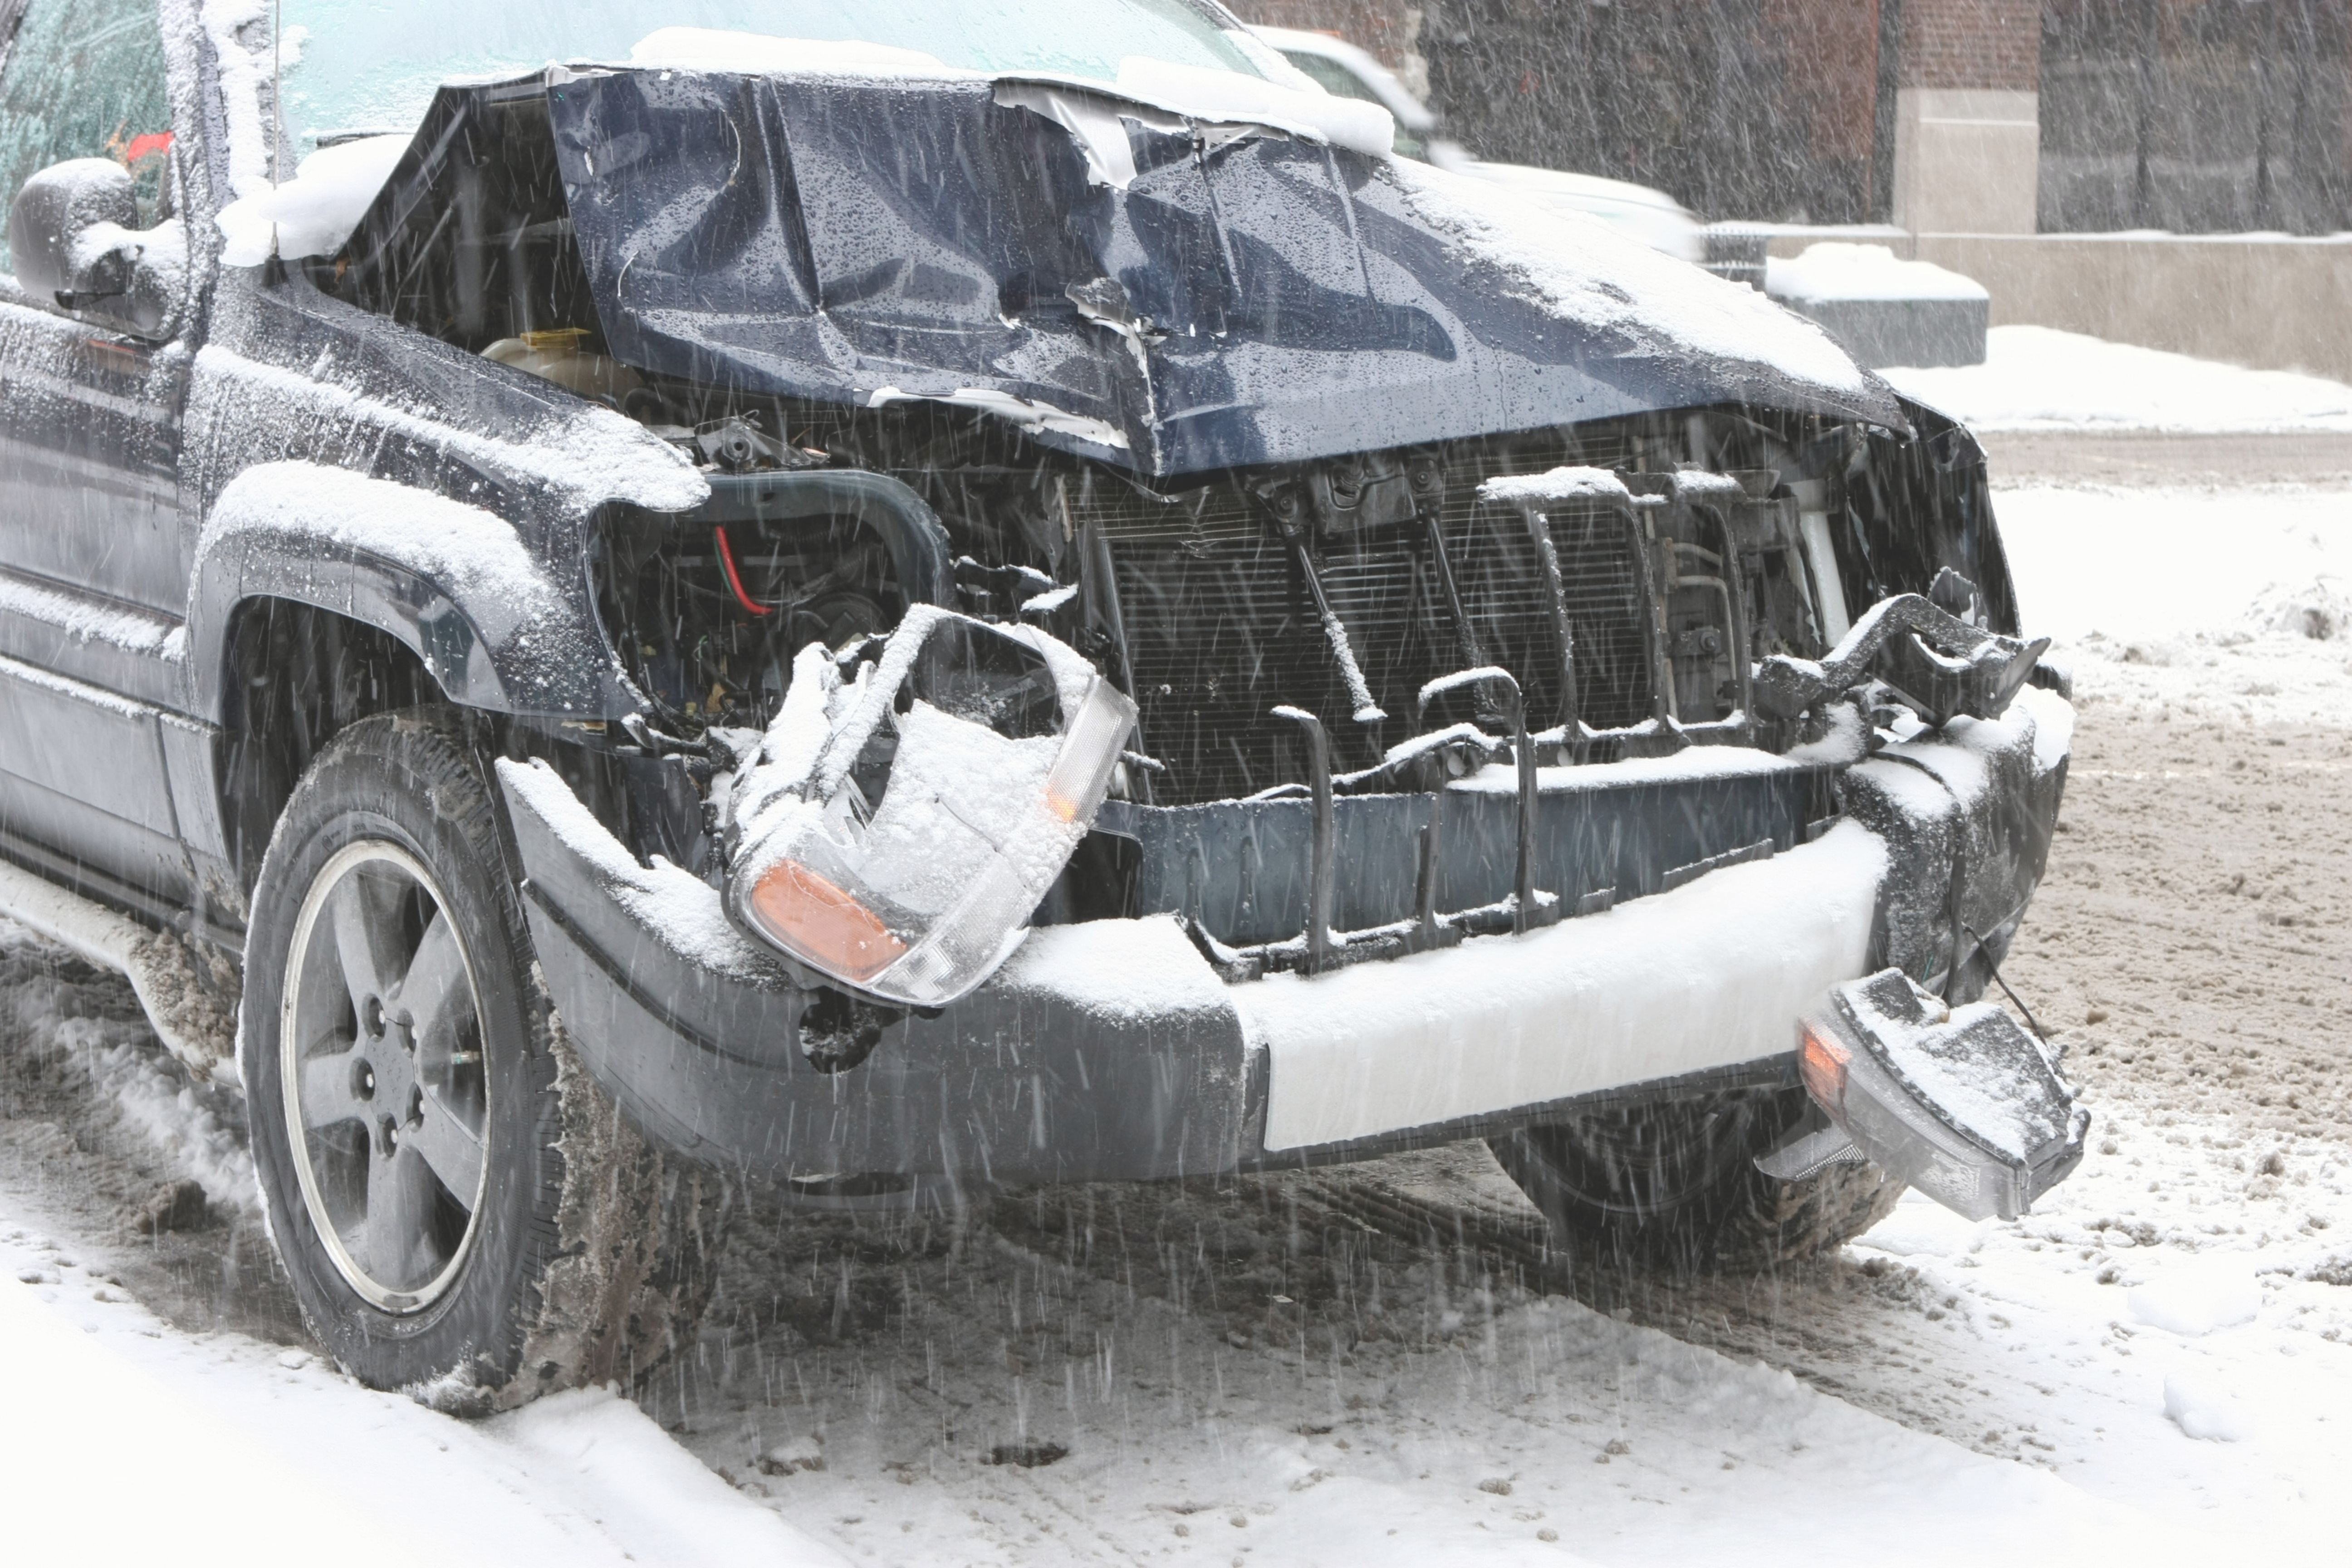 Midwest winters often mean more auto accidents. Keeping a cool head after an accident can keep everyone safer.